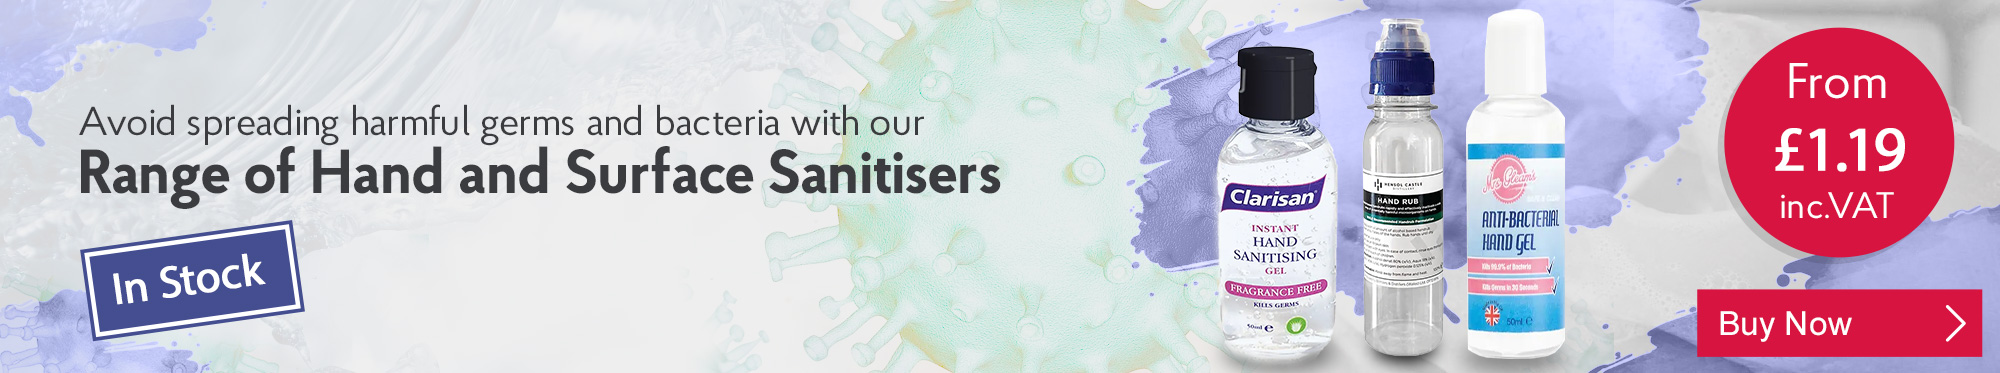 Avoid spreading harmful germs and bacteria with the range of Hand and Surface Sanitisers